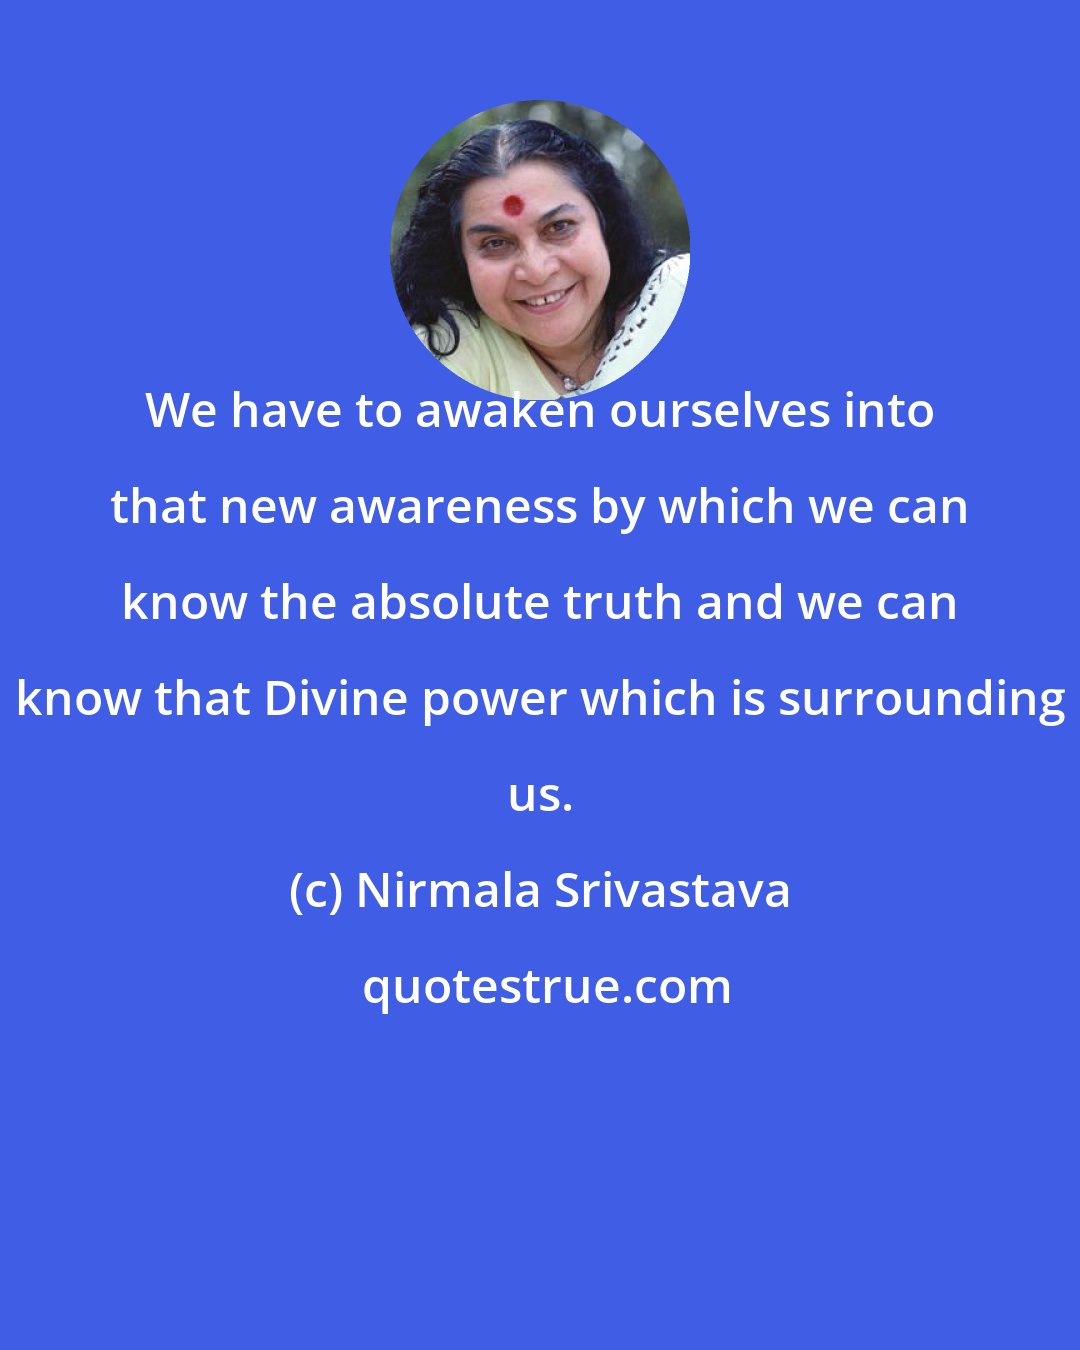 Nirmala Srivastava: We have to awaken ourselves into that new awareness by which we can know the absolute truth and we can know that Divine power which is surrounding us.